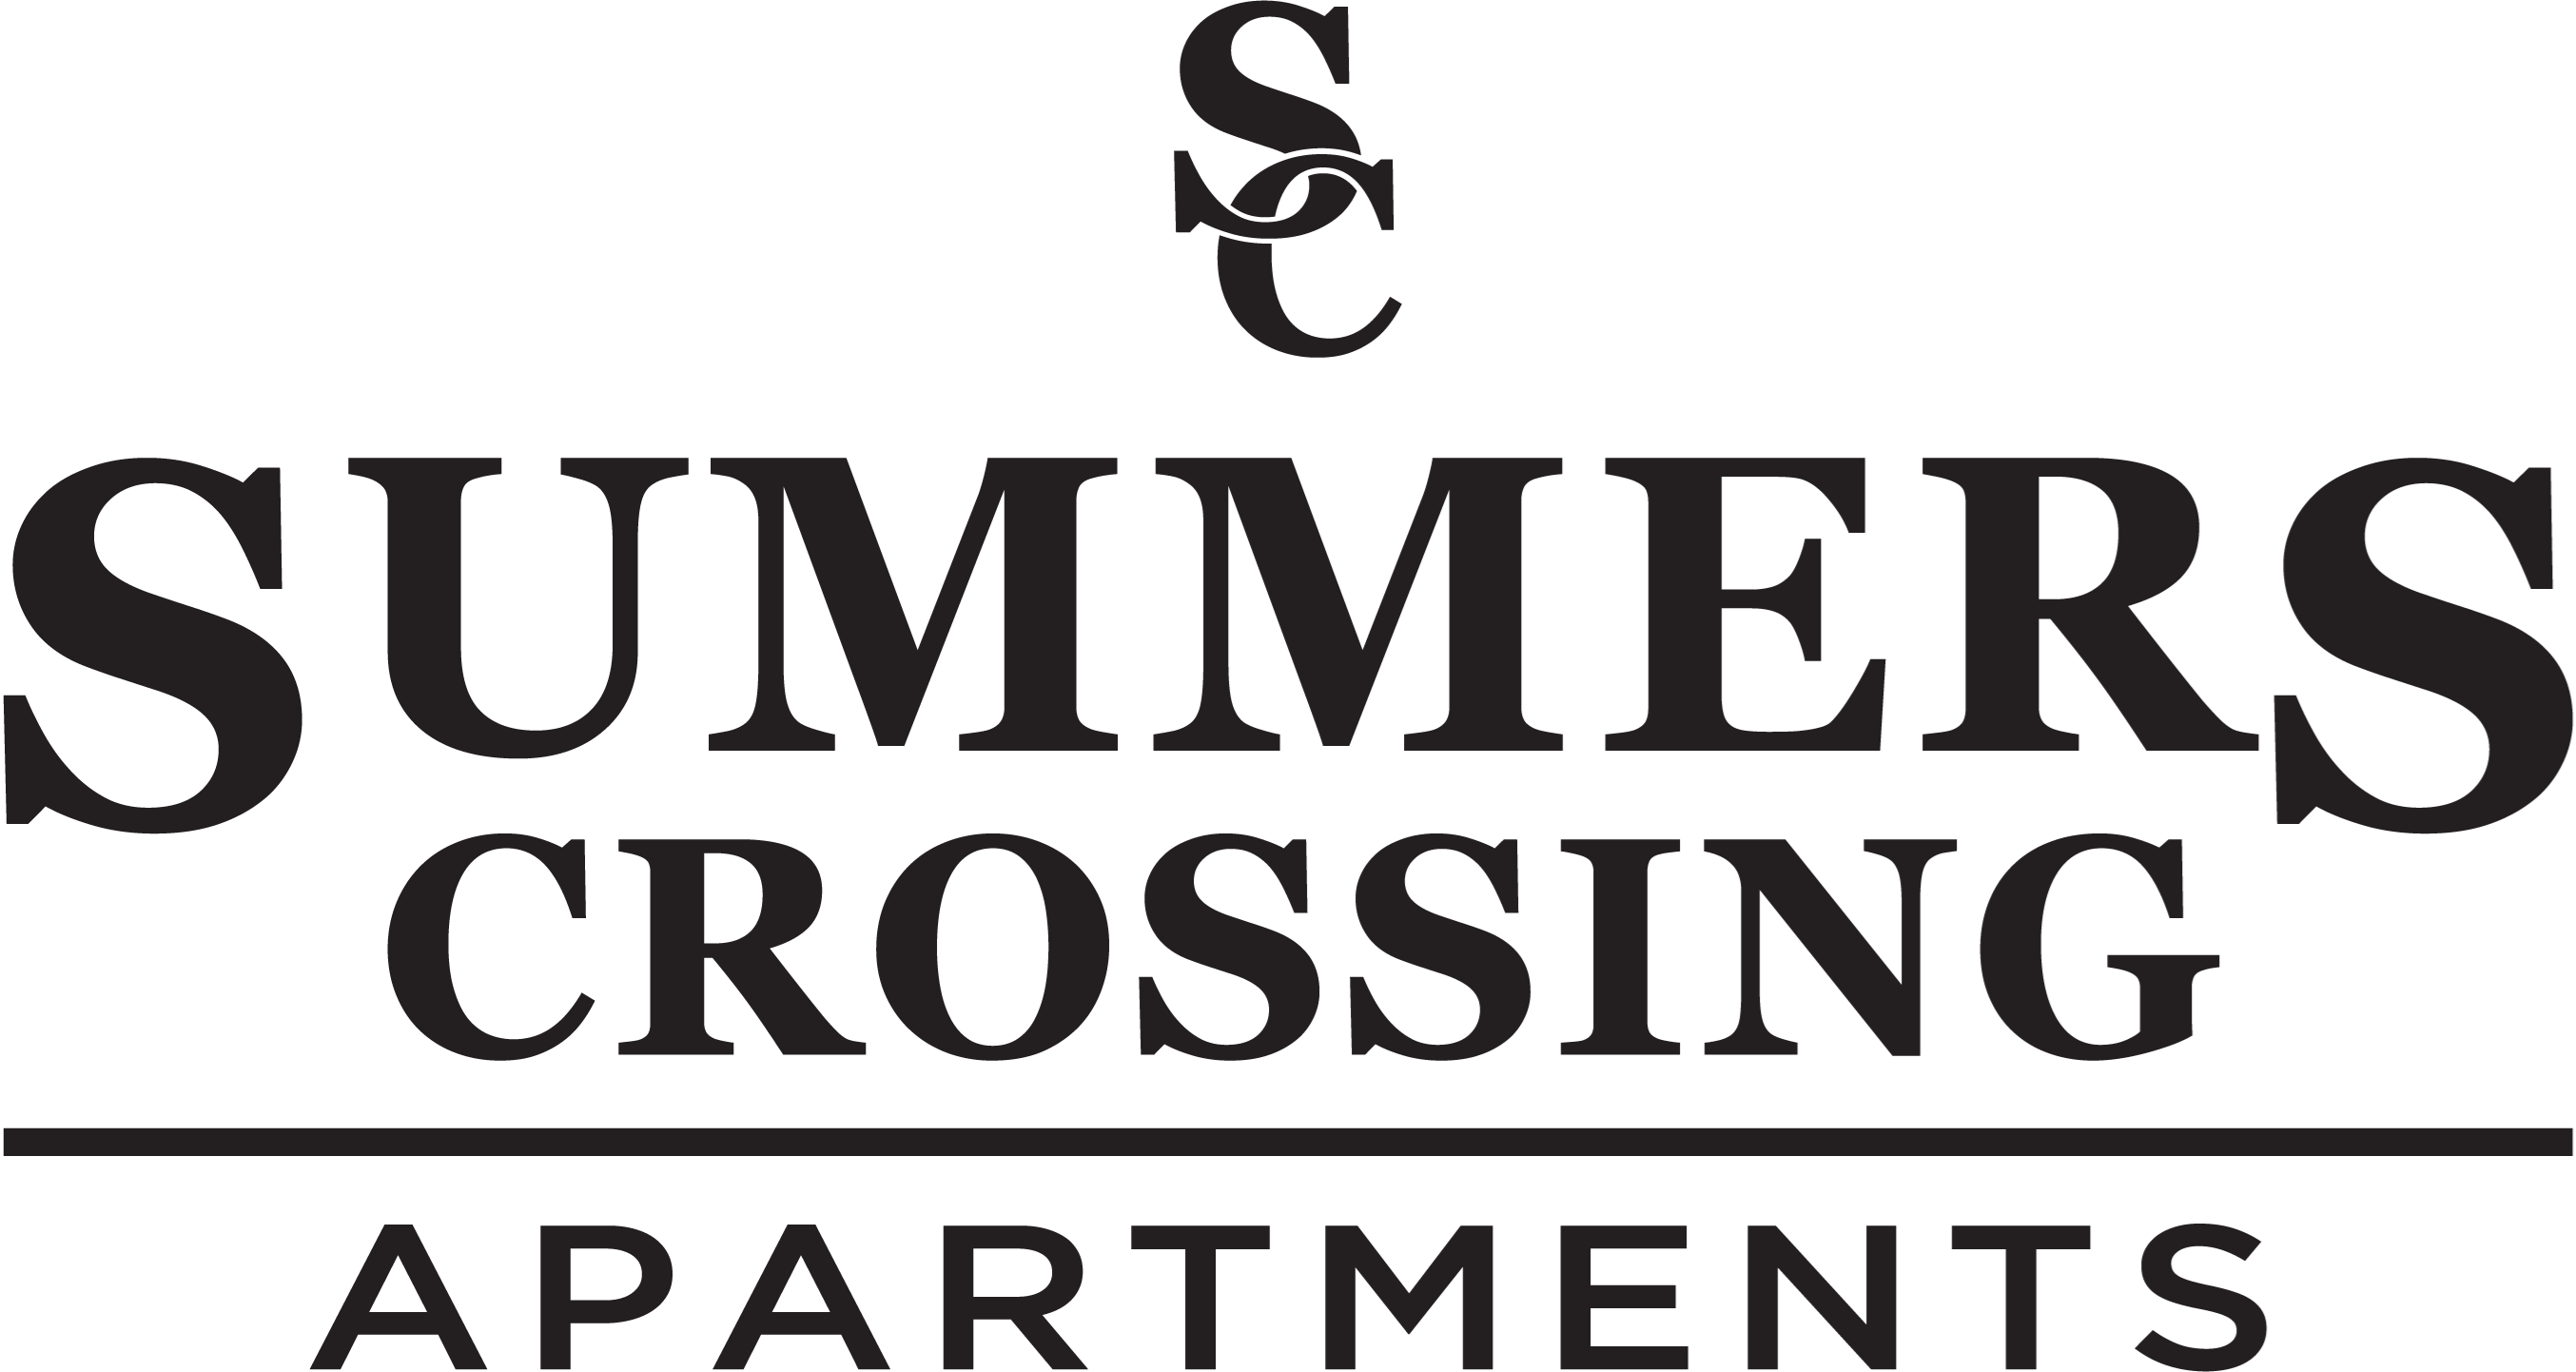 Company logo of Summers Crossing Apartments